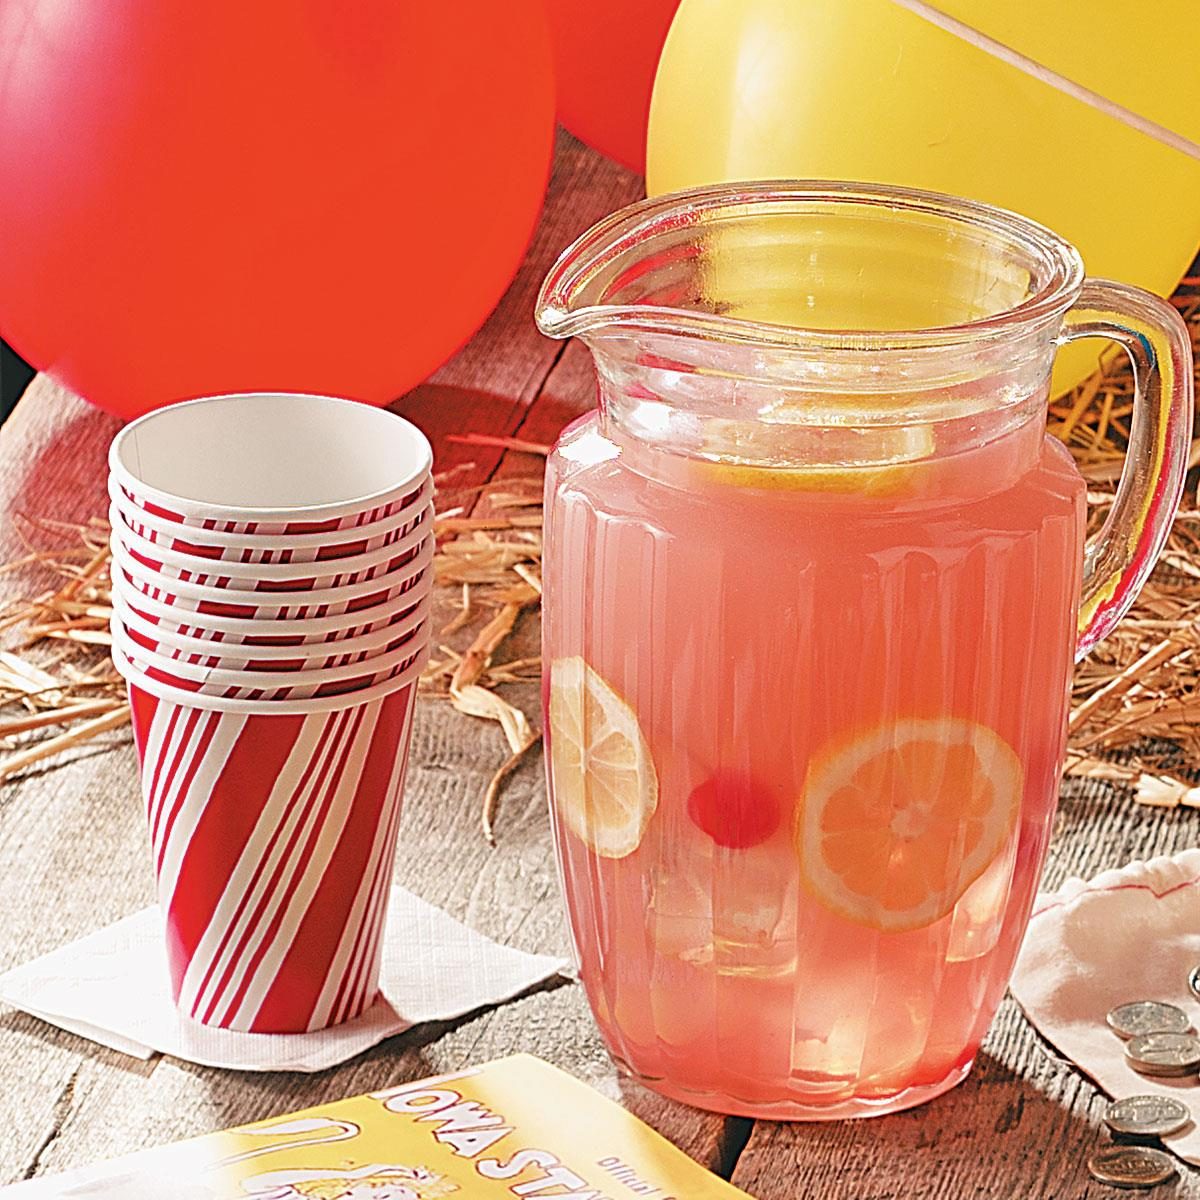 https://www.tasteofhome.com/wp-content/uploads/2018/01/Fresh-Squeezed-Pink-Lemonade_exps49928_RM1998683B05_11_1bC_RMS.jpg?fit=1024,1024